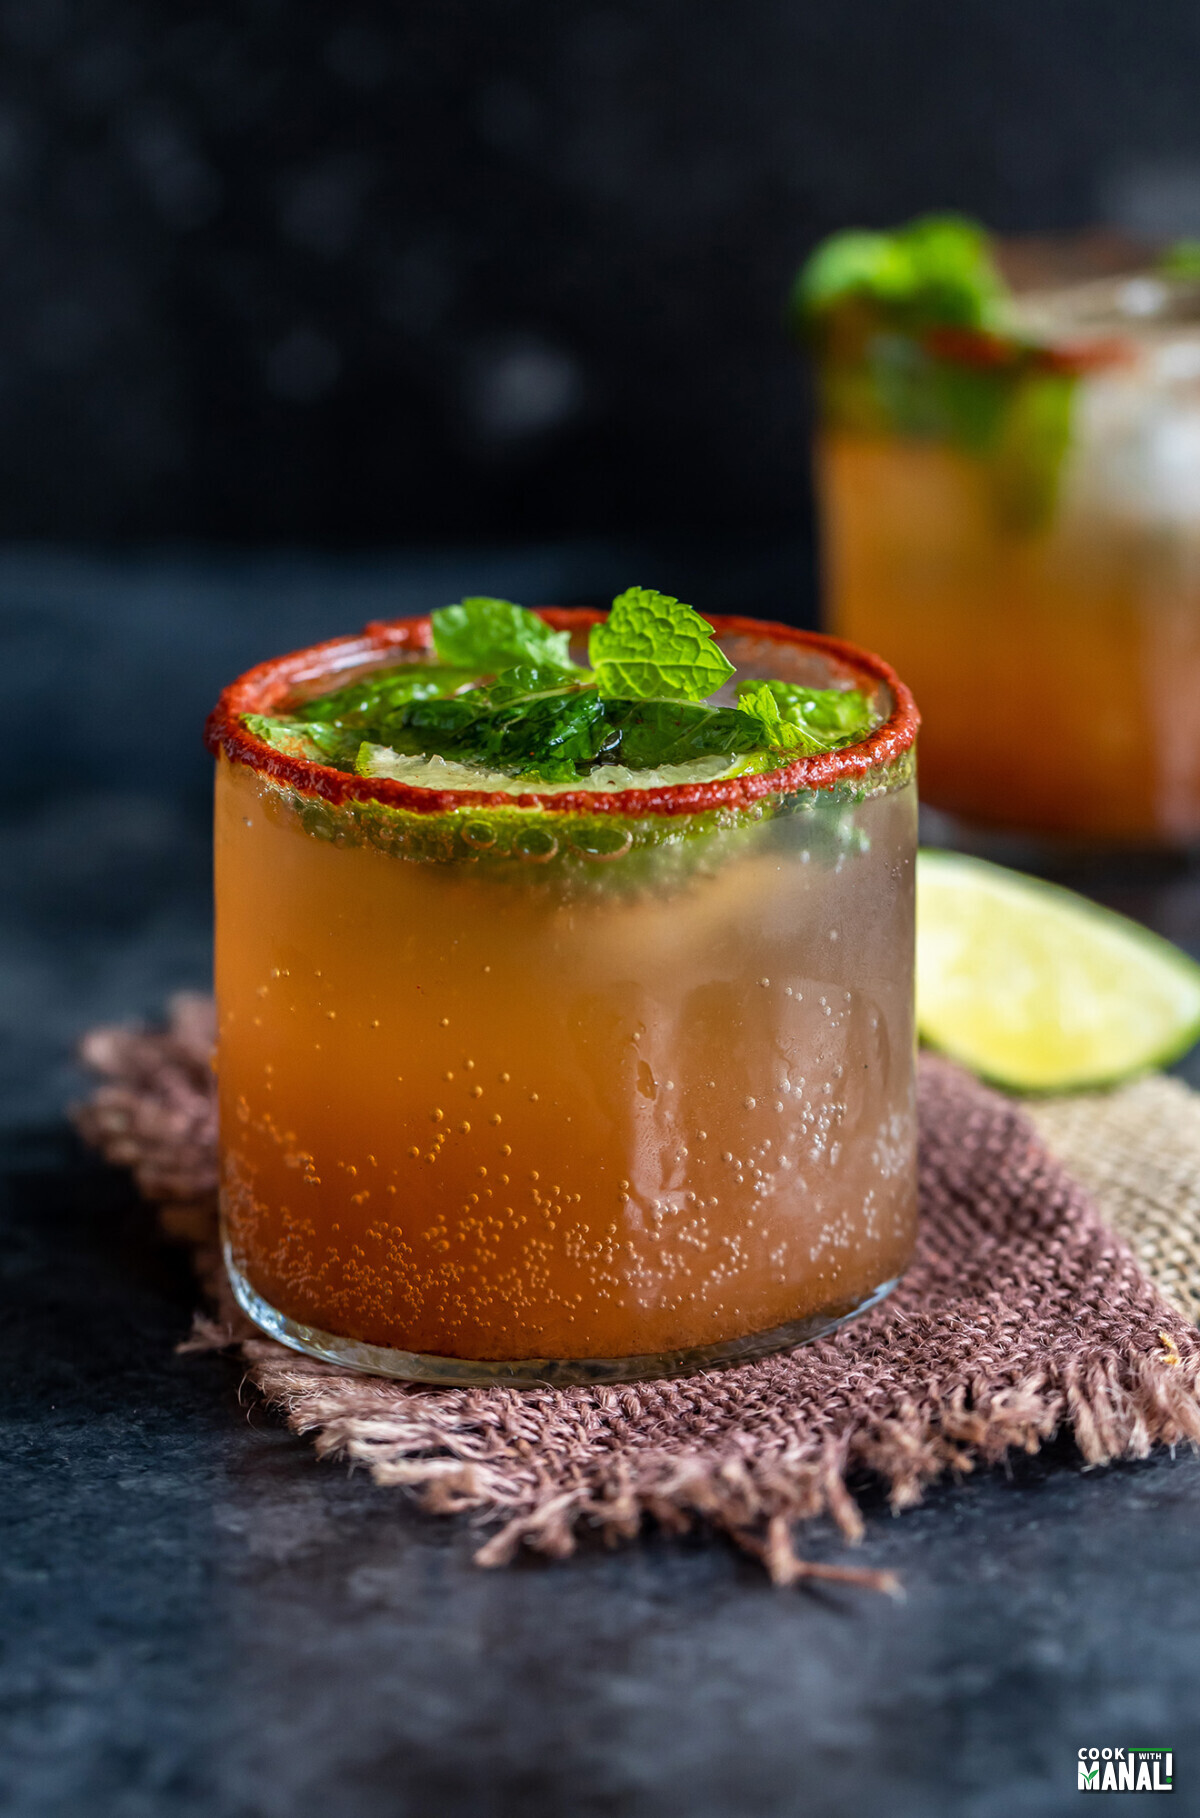 tamarind drink served in a glass topped with mint leaves and lemon wedges